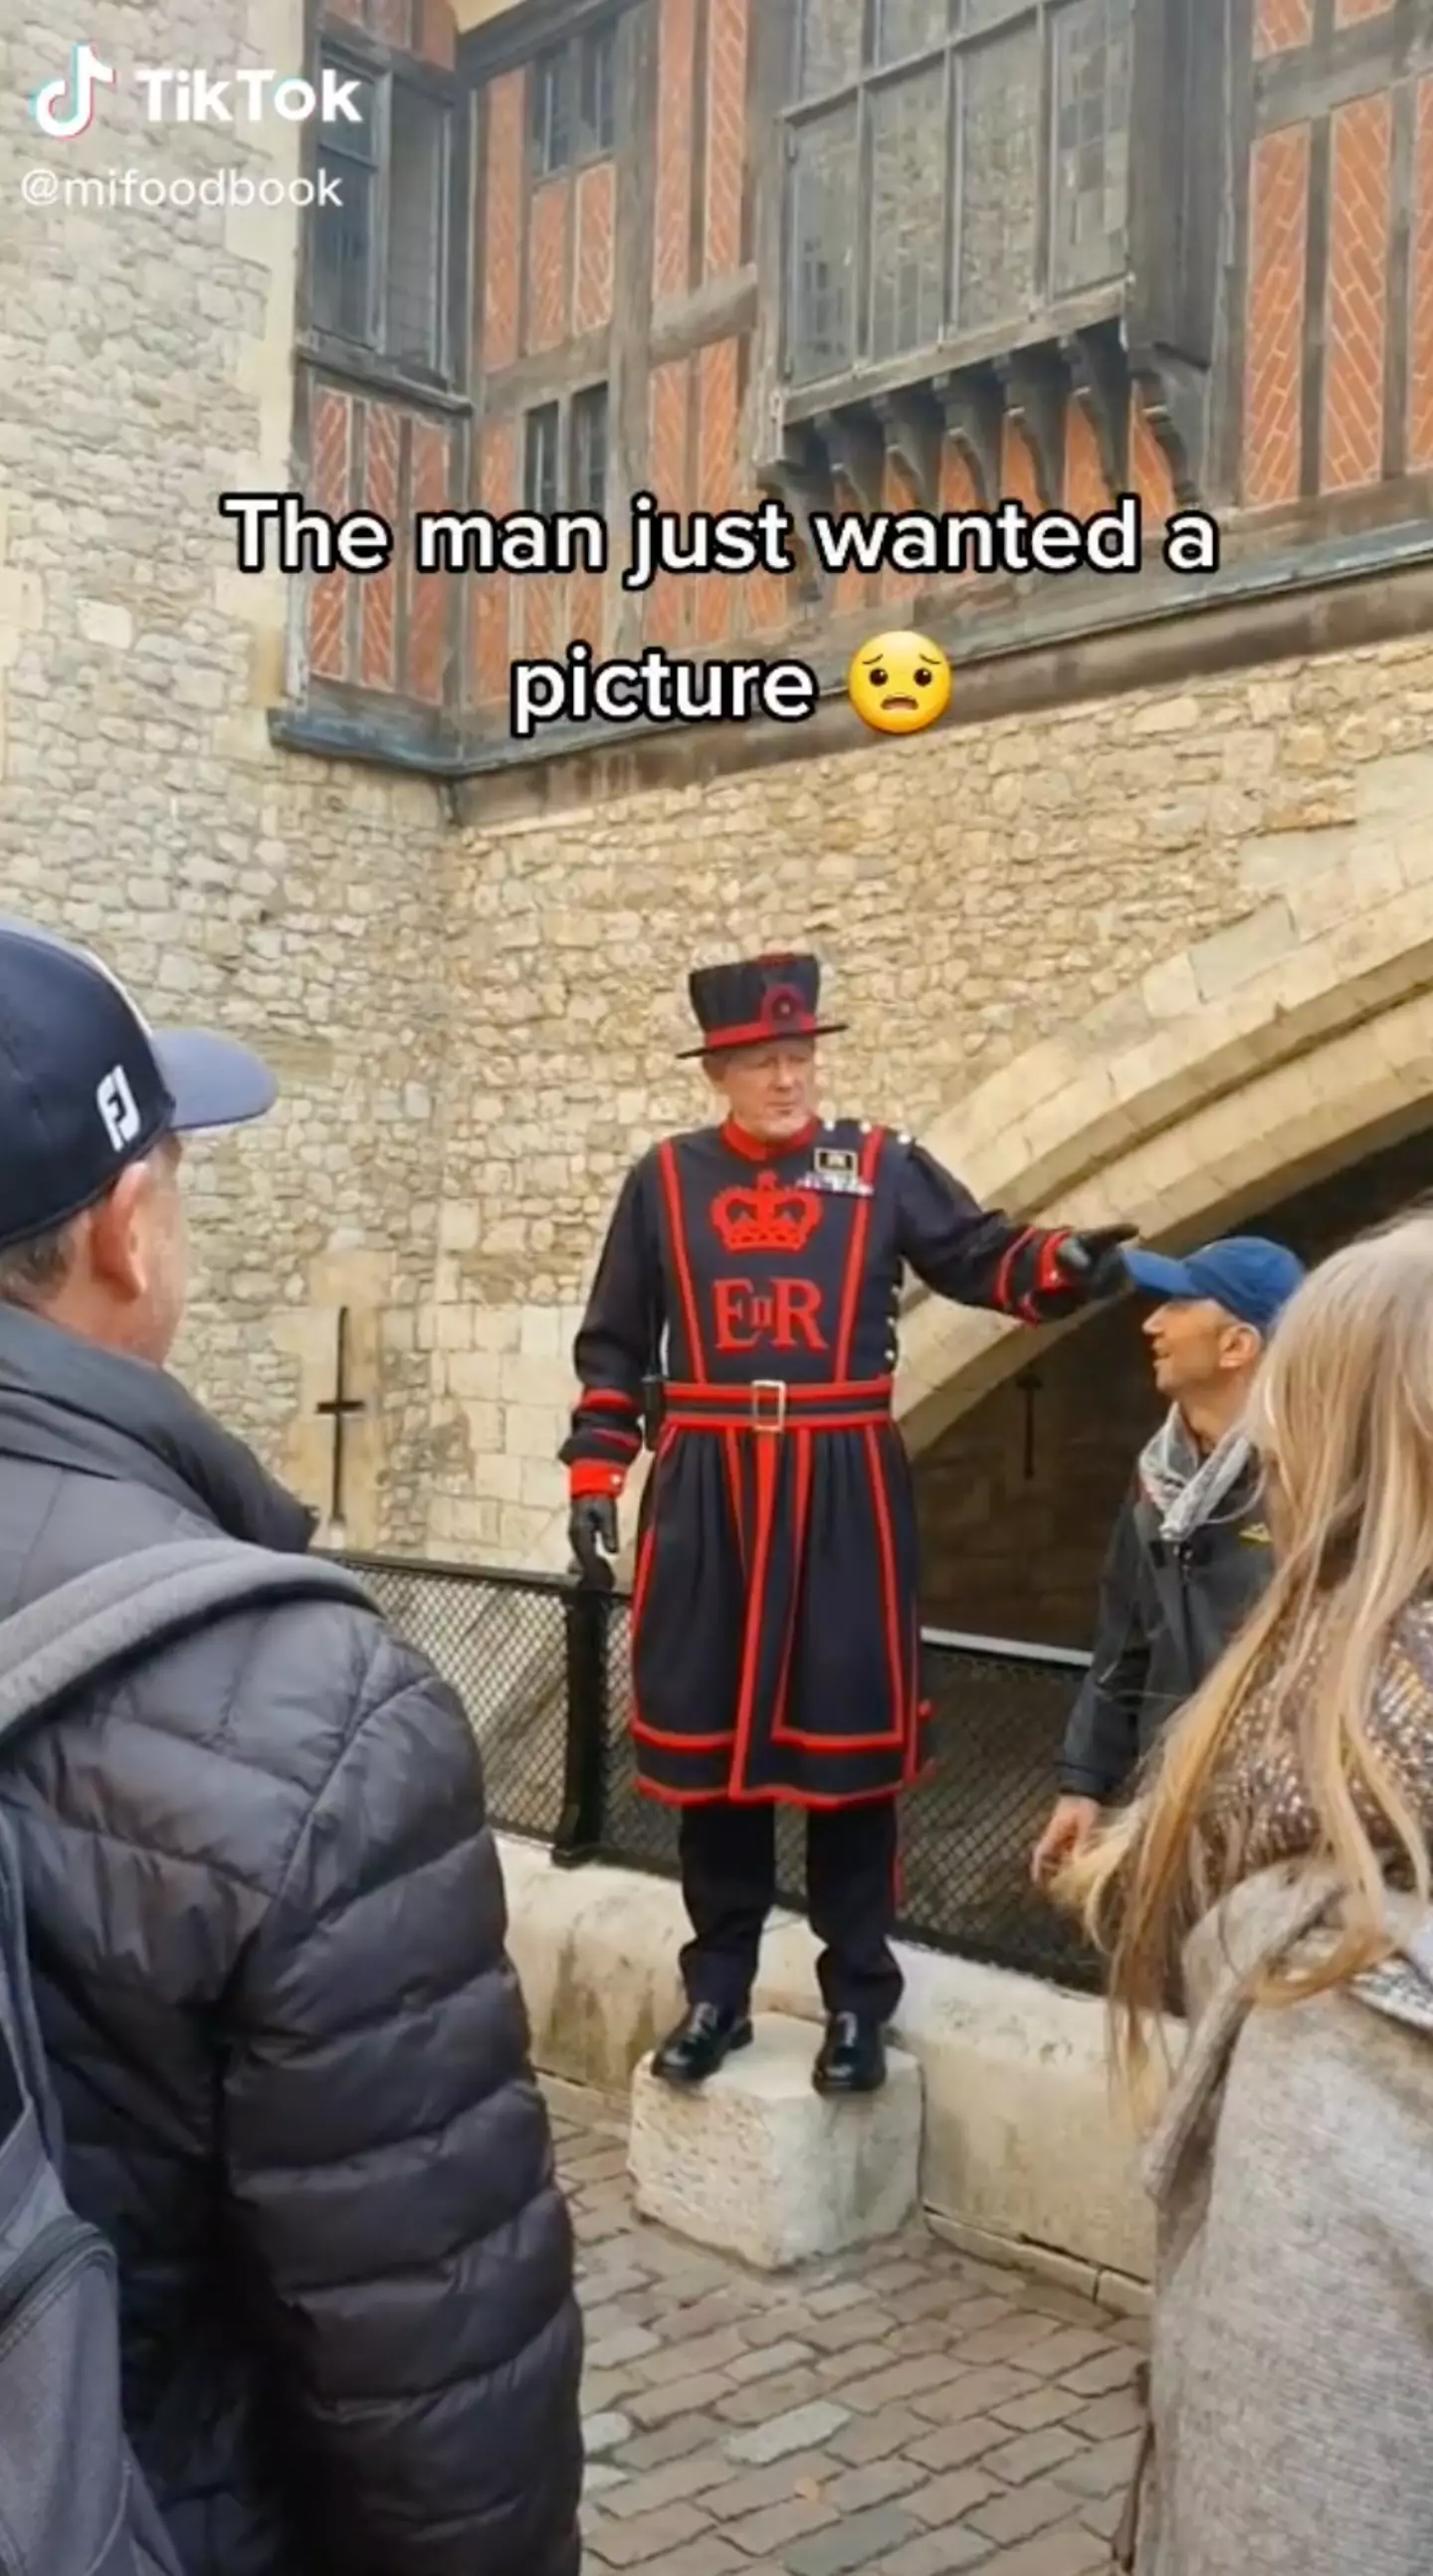 The Yeoman Warder sternly told the tourist to step back.